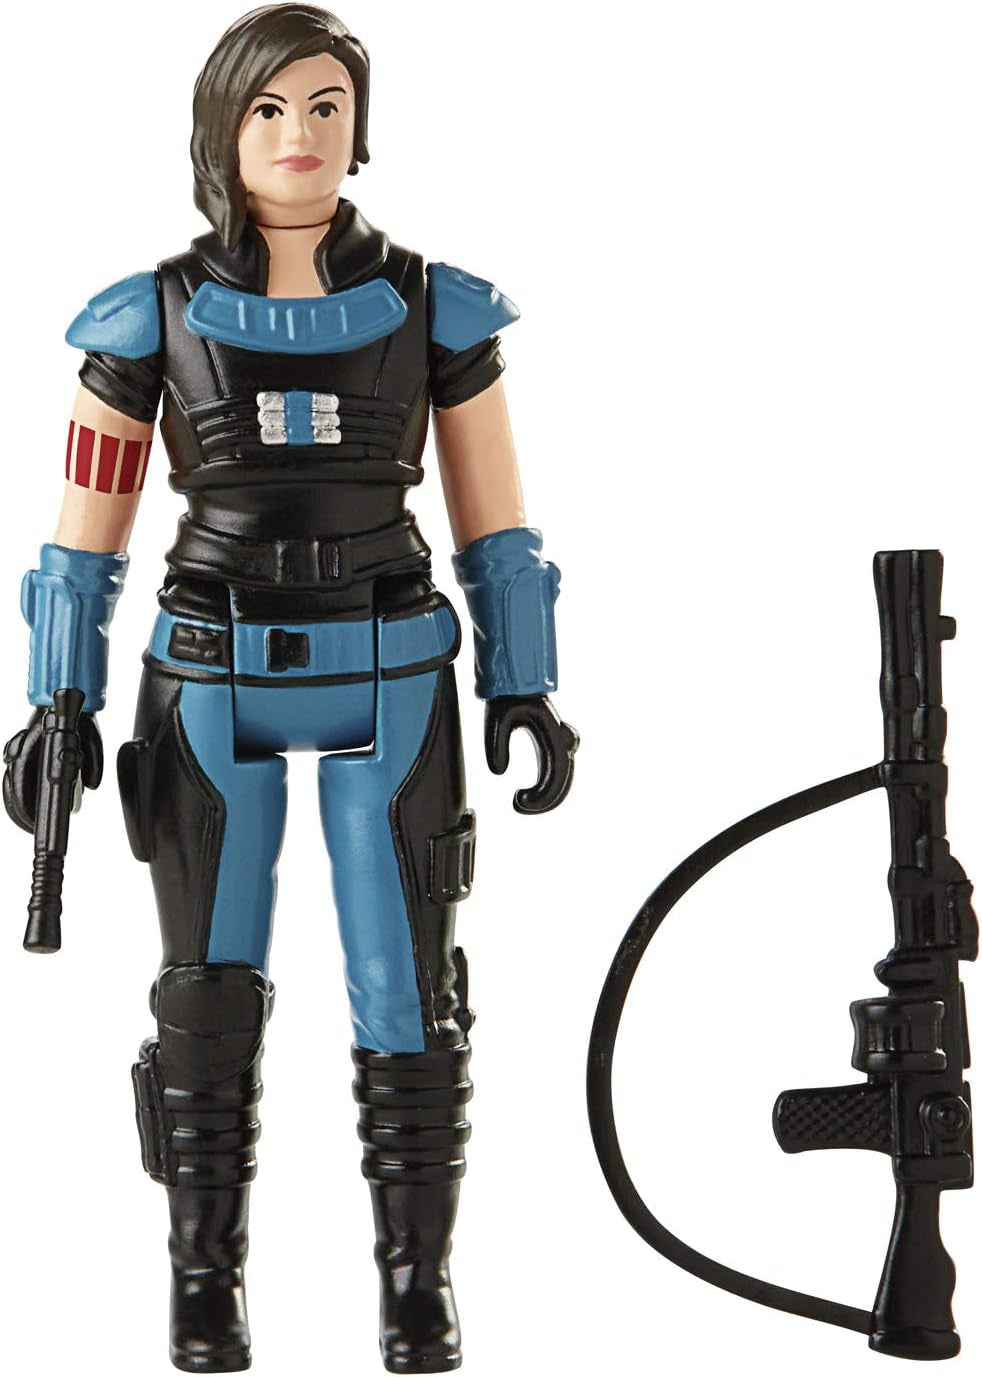 Retro Collection Cara Dune Toy 3.75-Inch-Scale the Mandalorian Action Figure with Accessories, Toys for Kids Ages 4 and Up